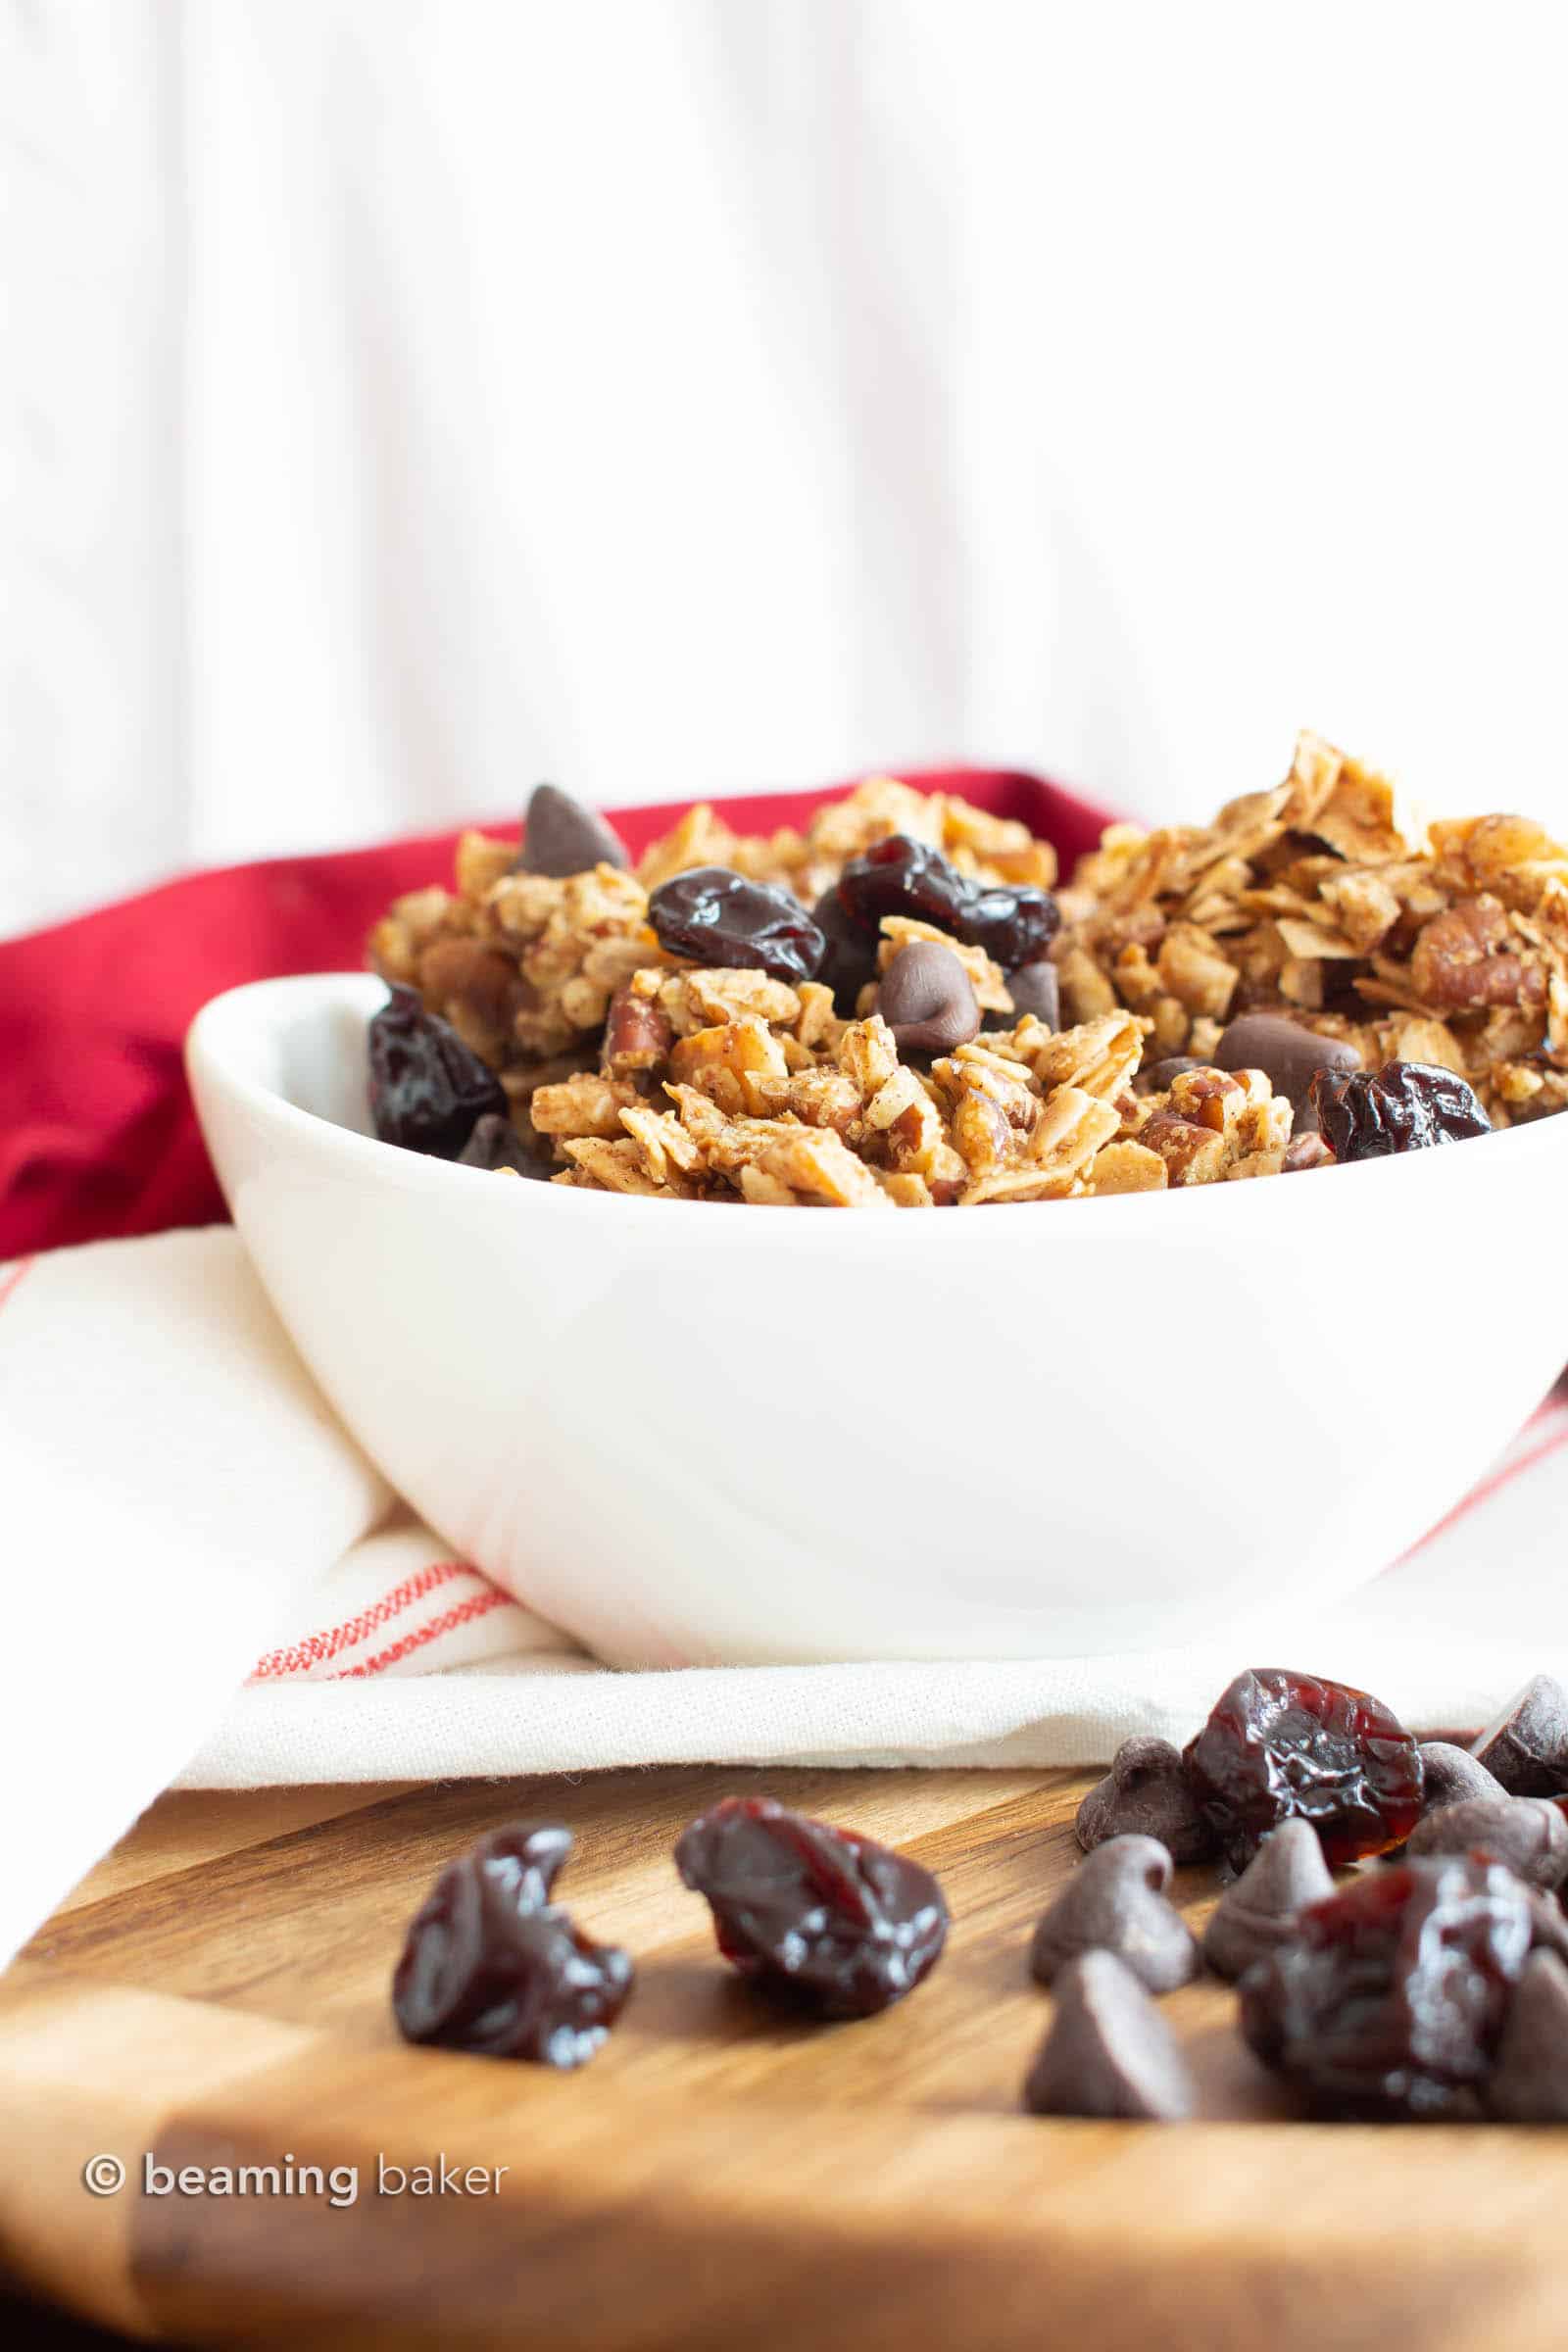 Healthy Granola Recipe with Cherries & Chocolate: the best EASY healthy granola recipe with BIG chunky clusters, packed full of nutty crunch, satisfying chewy oats, tart & sweet cherries with chocolate! #Granola #Healthy #Snacks #Vegan | Recipe at BeamingBaker.com